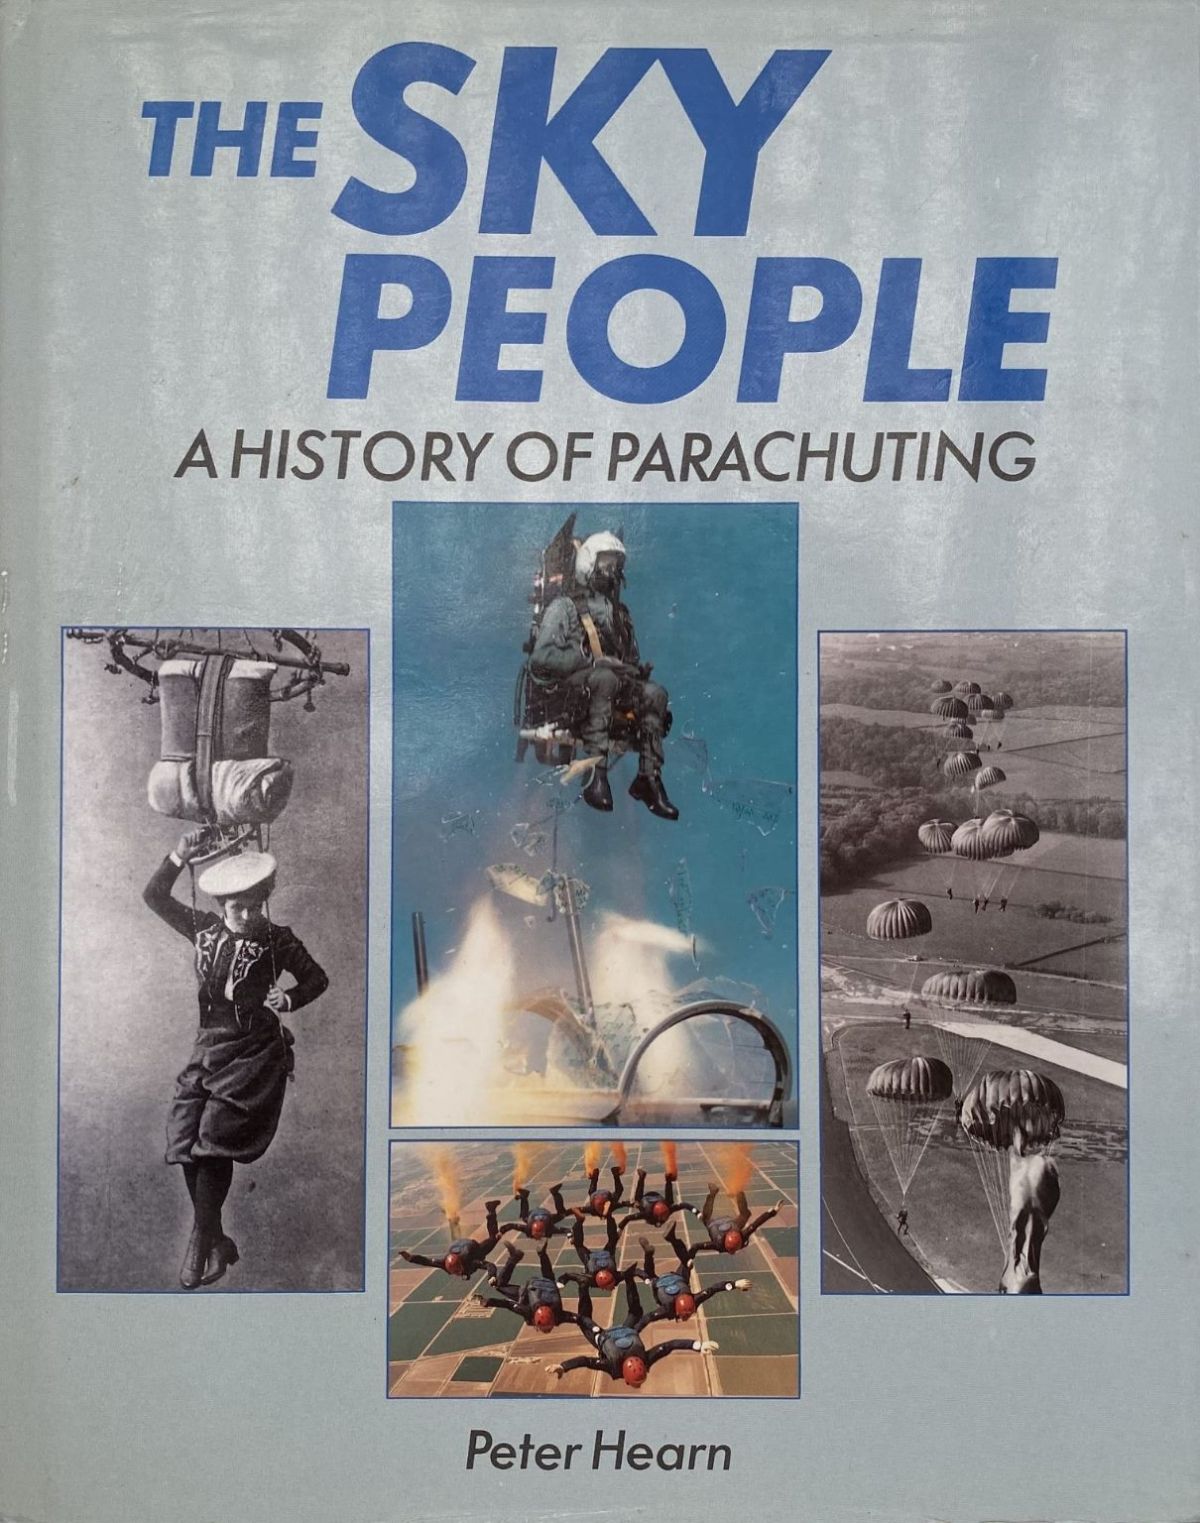 THE SKY PEOPLE: A History of Parachuting